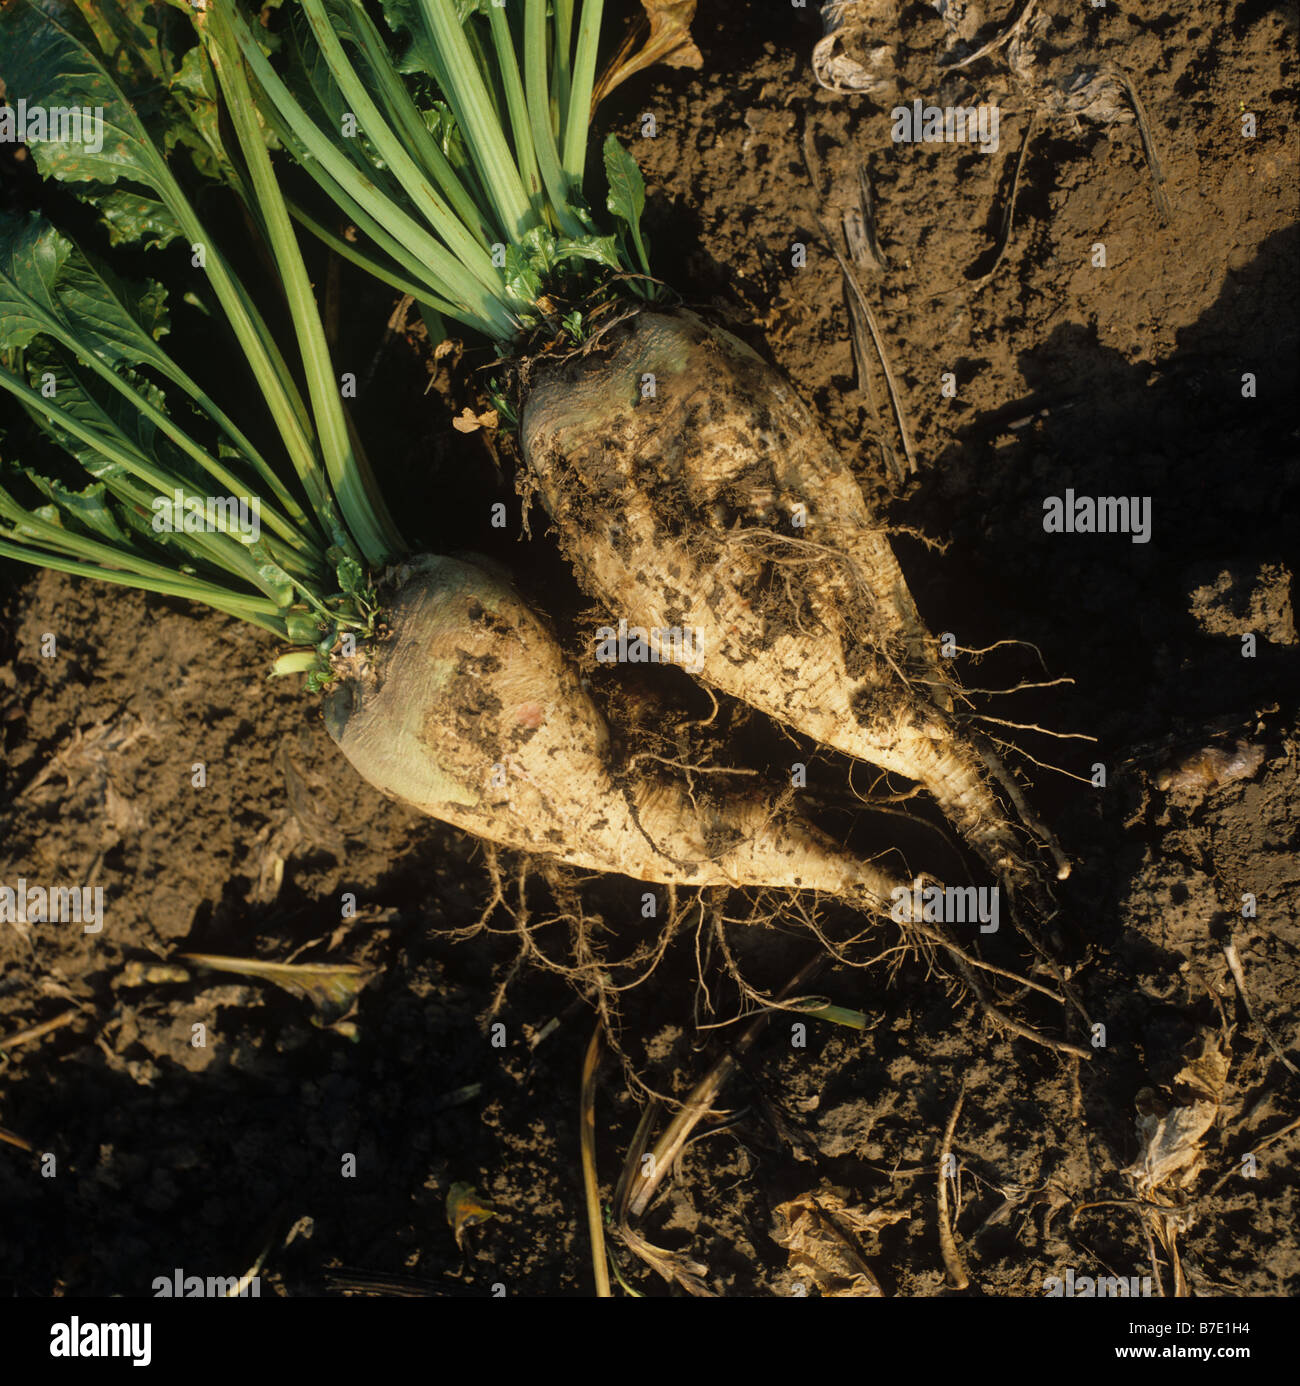 A good example of harvested mature sugar beet roots Stock Photo